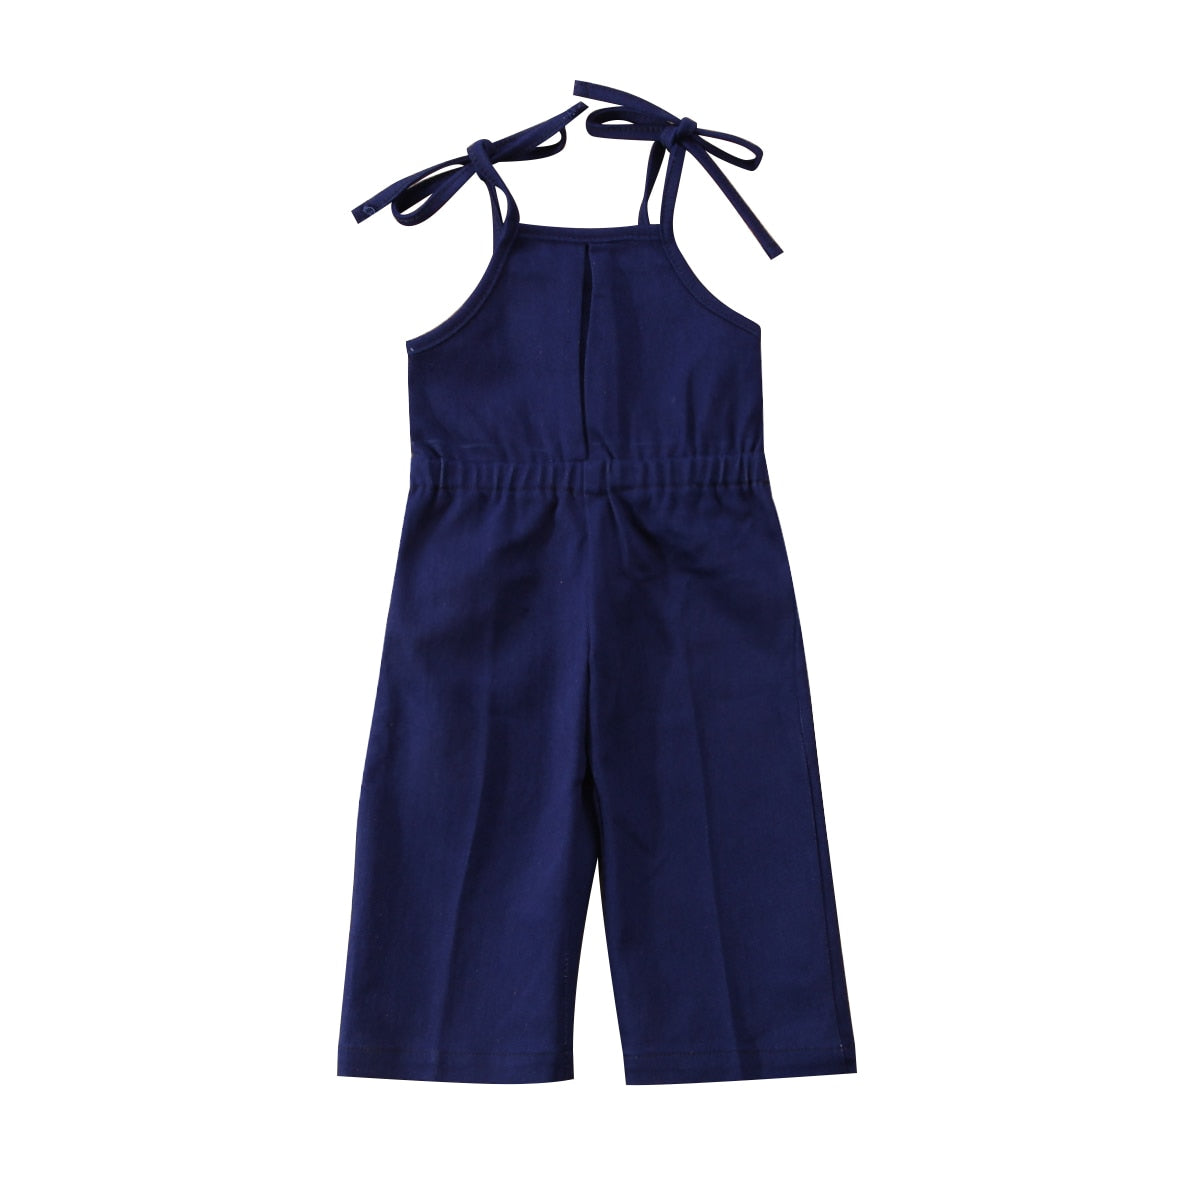 Sleeveless Baby Girls Denim Strap Romper Jumpsuit Outfits  Overalls Set Clothes Summer 1-7T - ebowsos